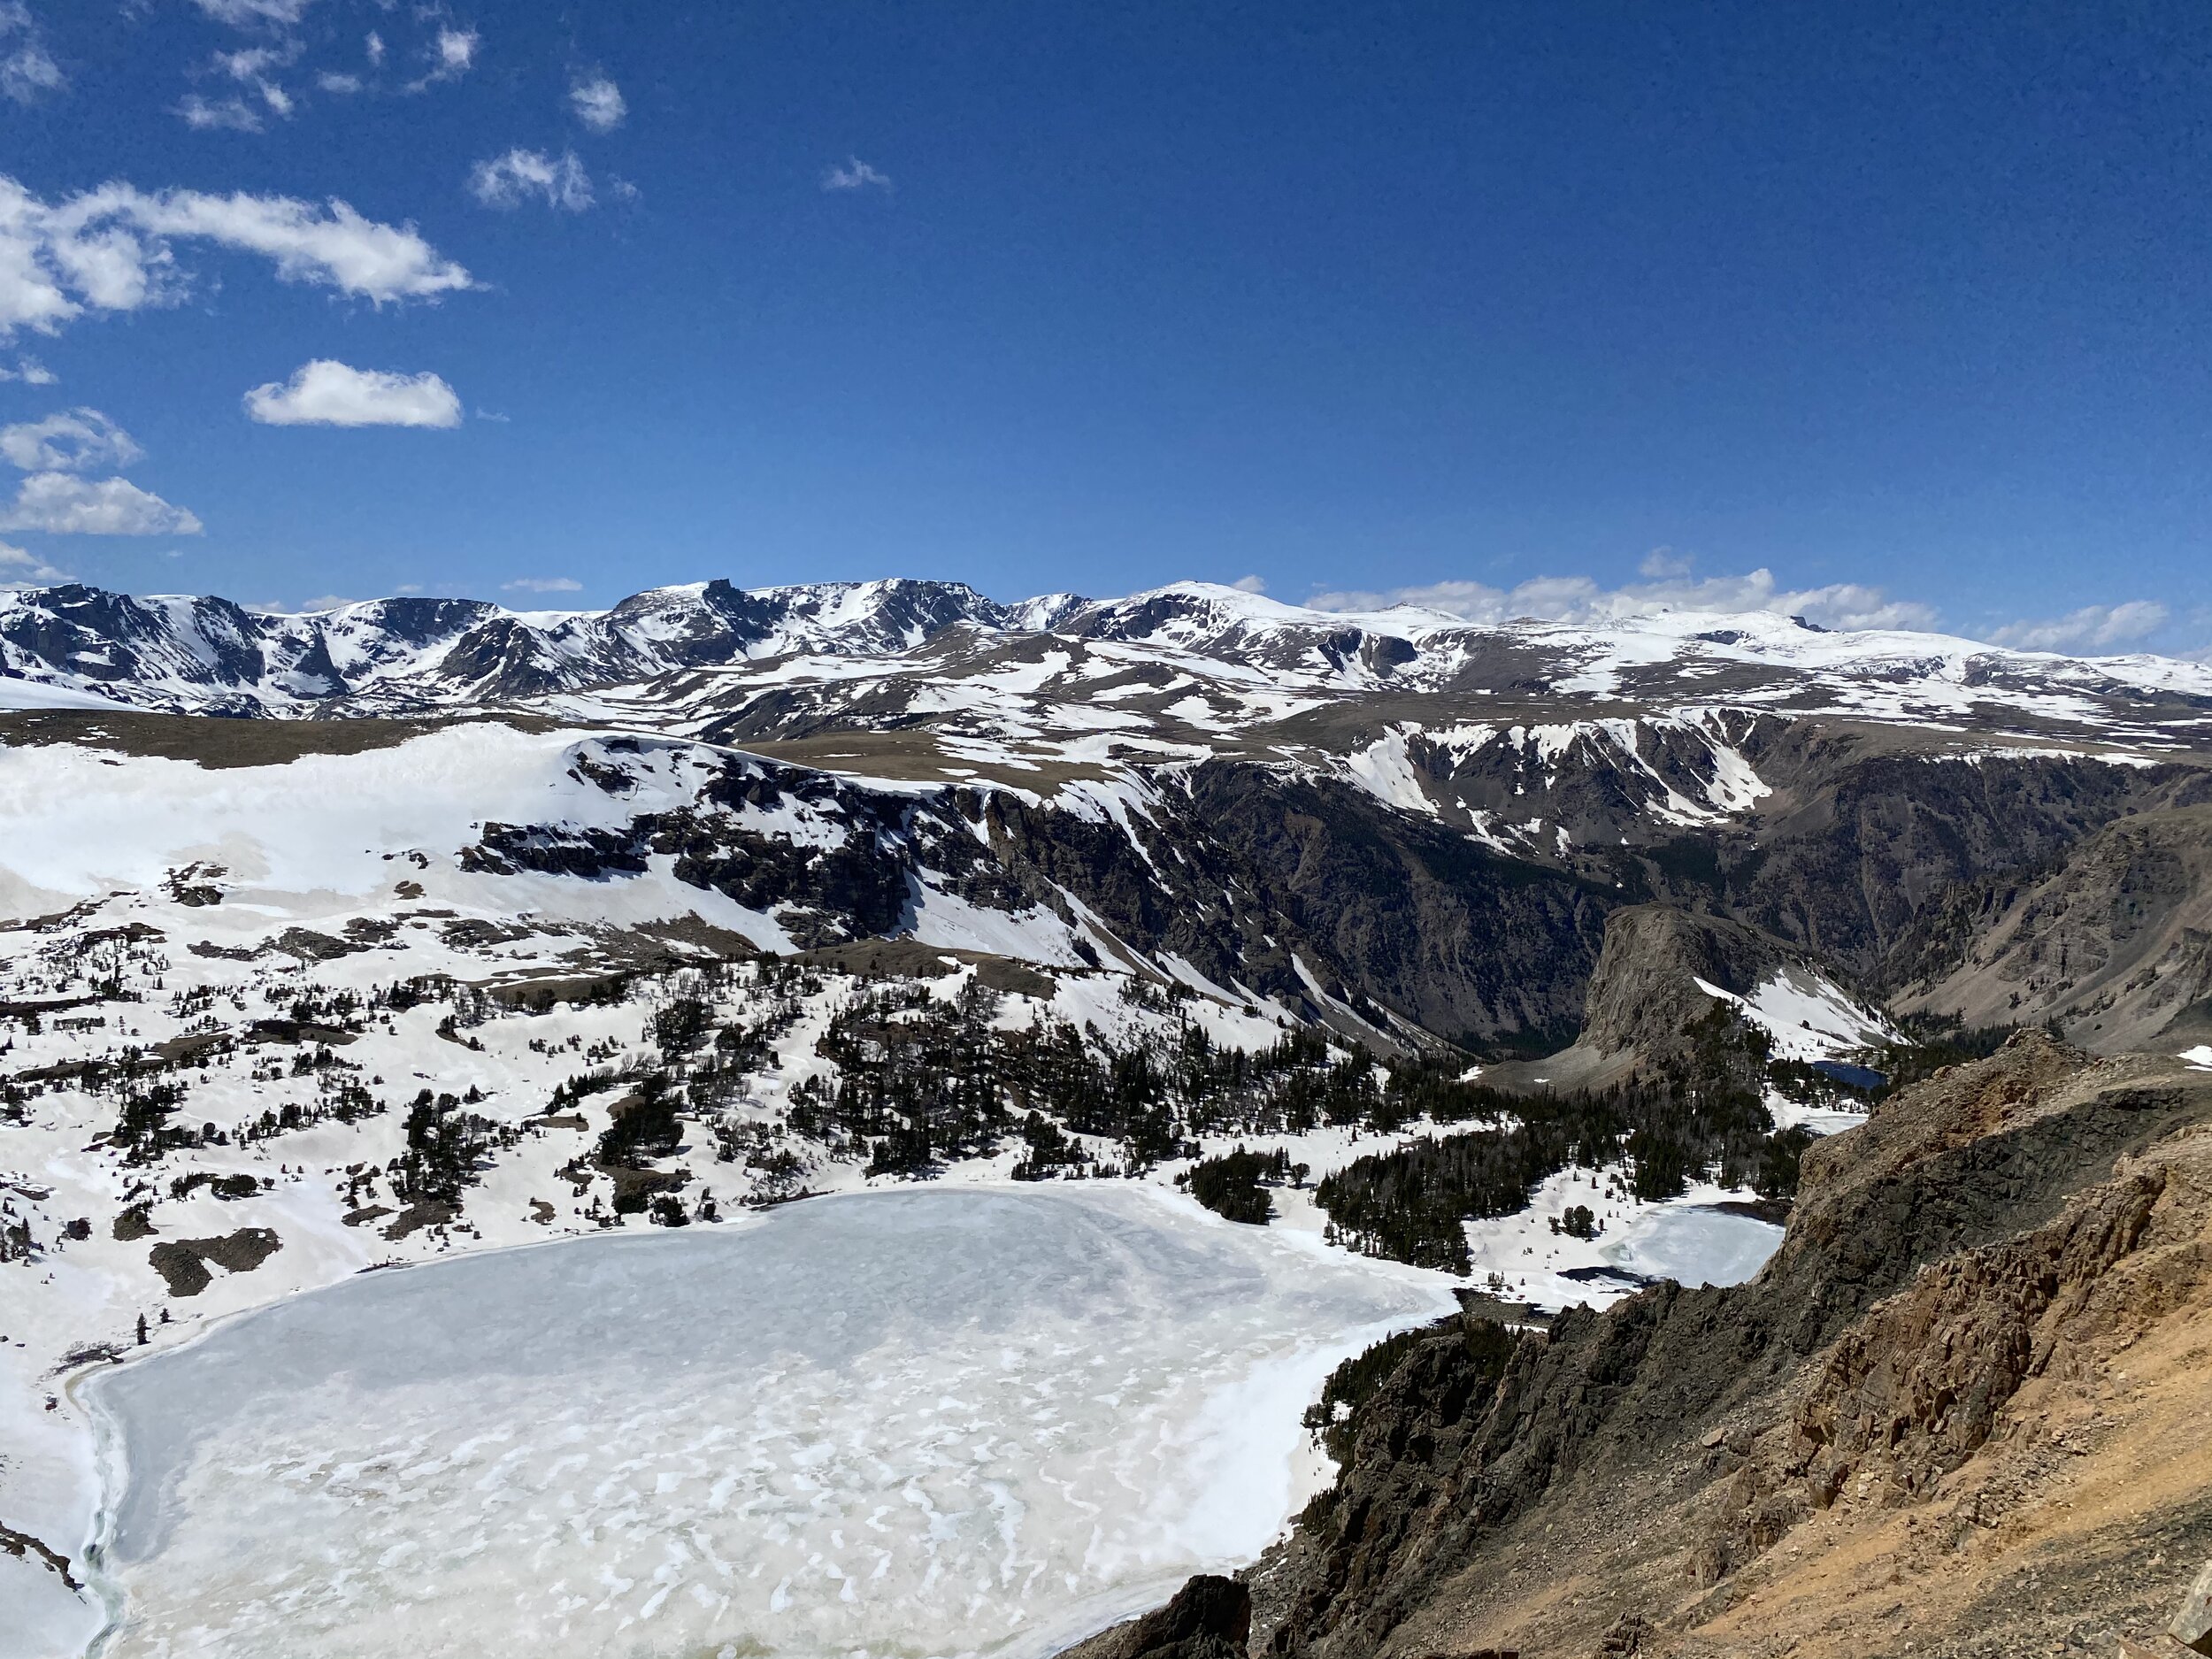 On Beartooth Pass, if you have the courage to look over the steep edges at some parts of the drive, you may discover a beautiful frozen lake amidst the gorgeous and expansive mountain view.  Photo by Karen Boudreaux, May 29, 2021